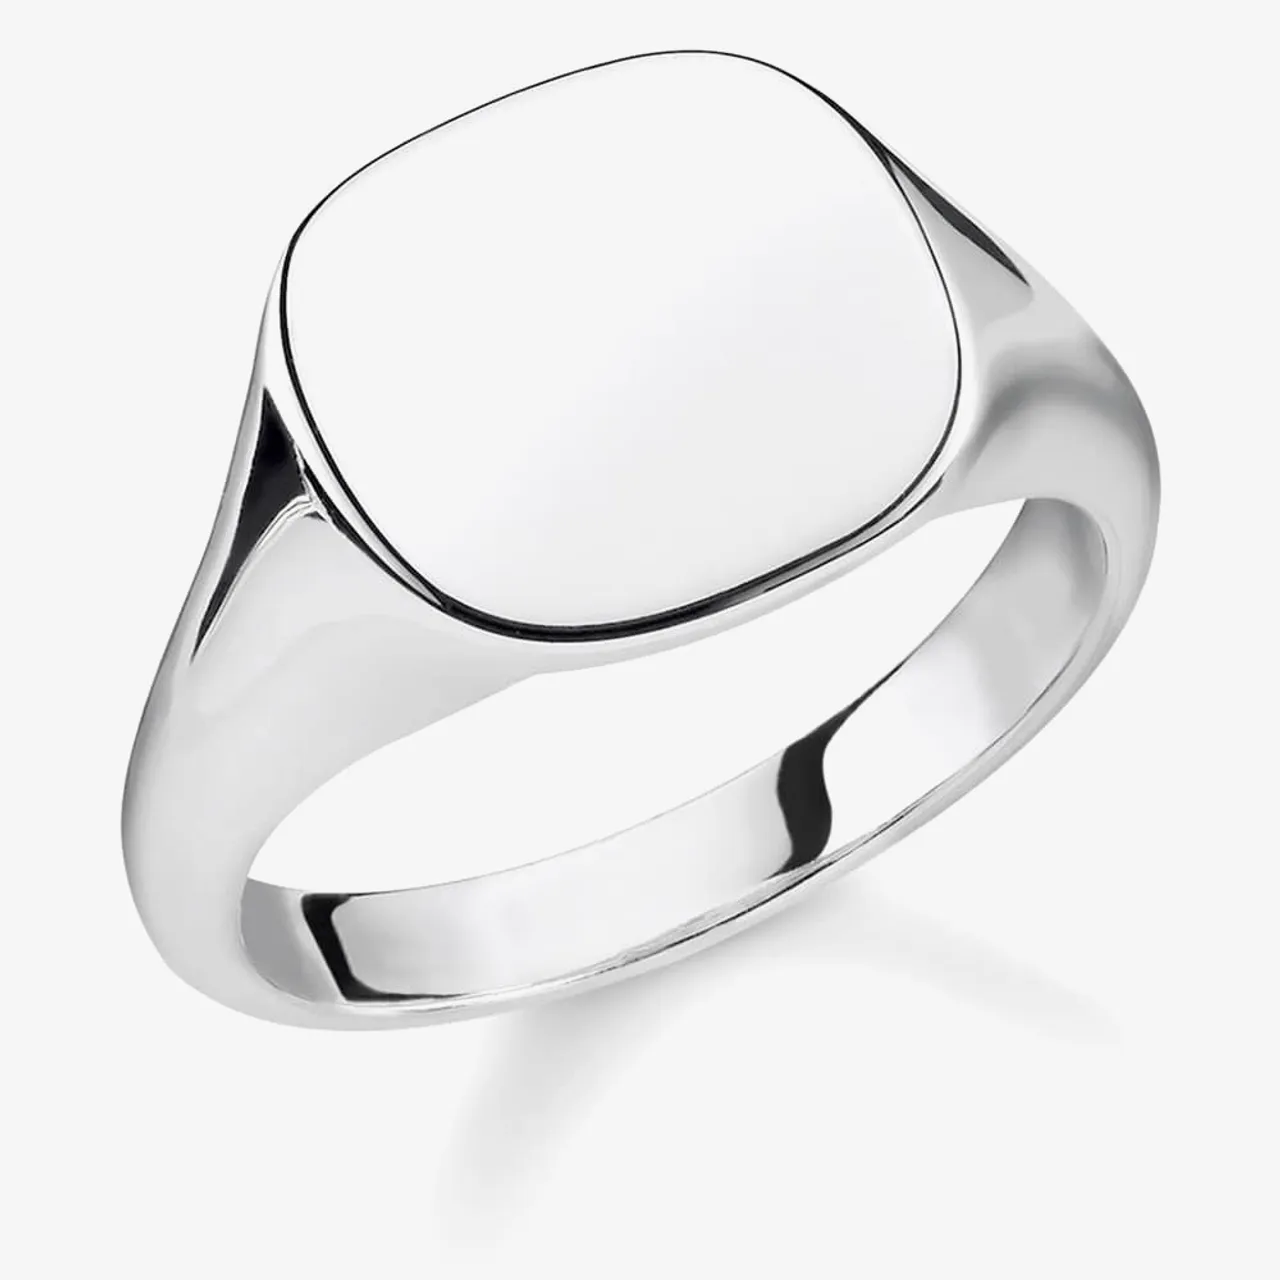 THOMAS SABO Sterling Silver Classic Square Shaped Signet Ring TR2248-001-21-58